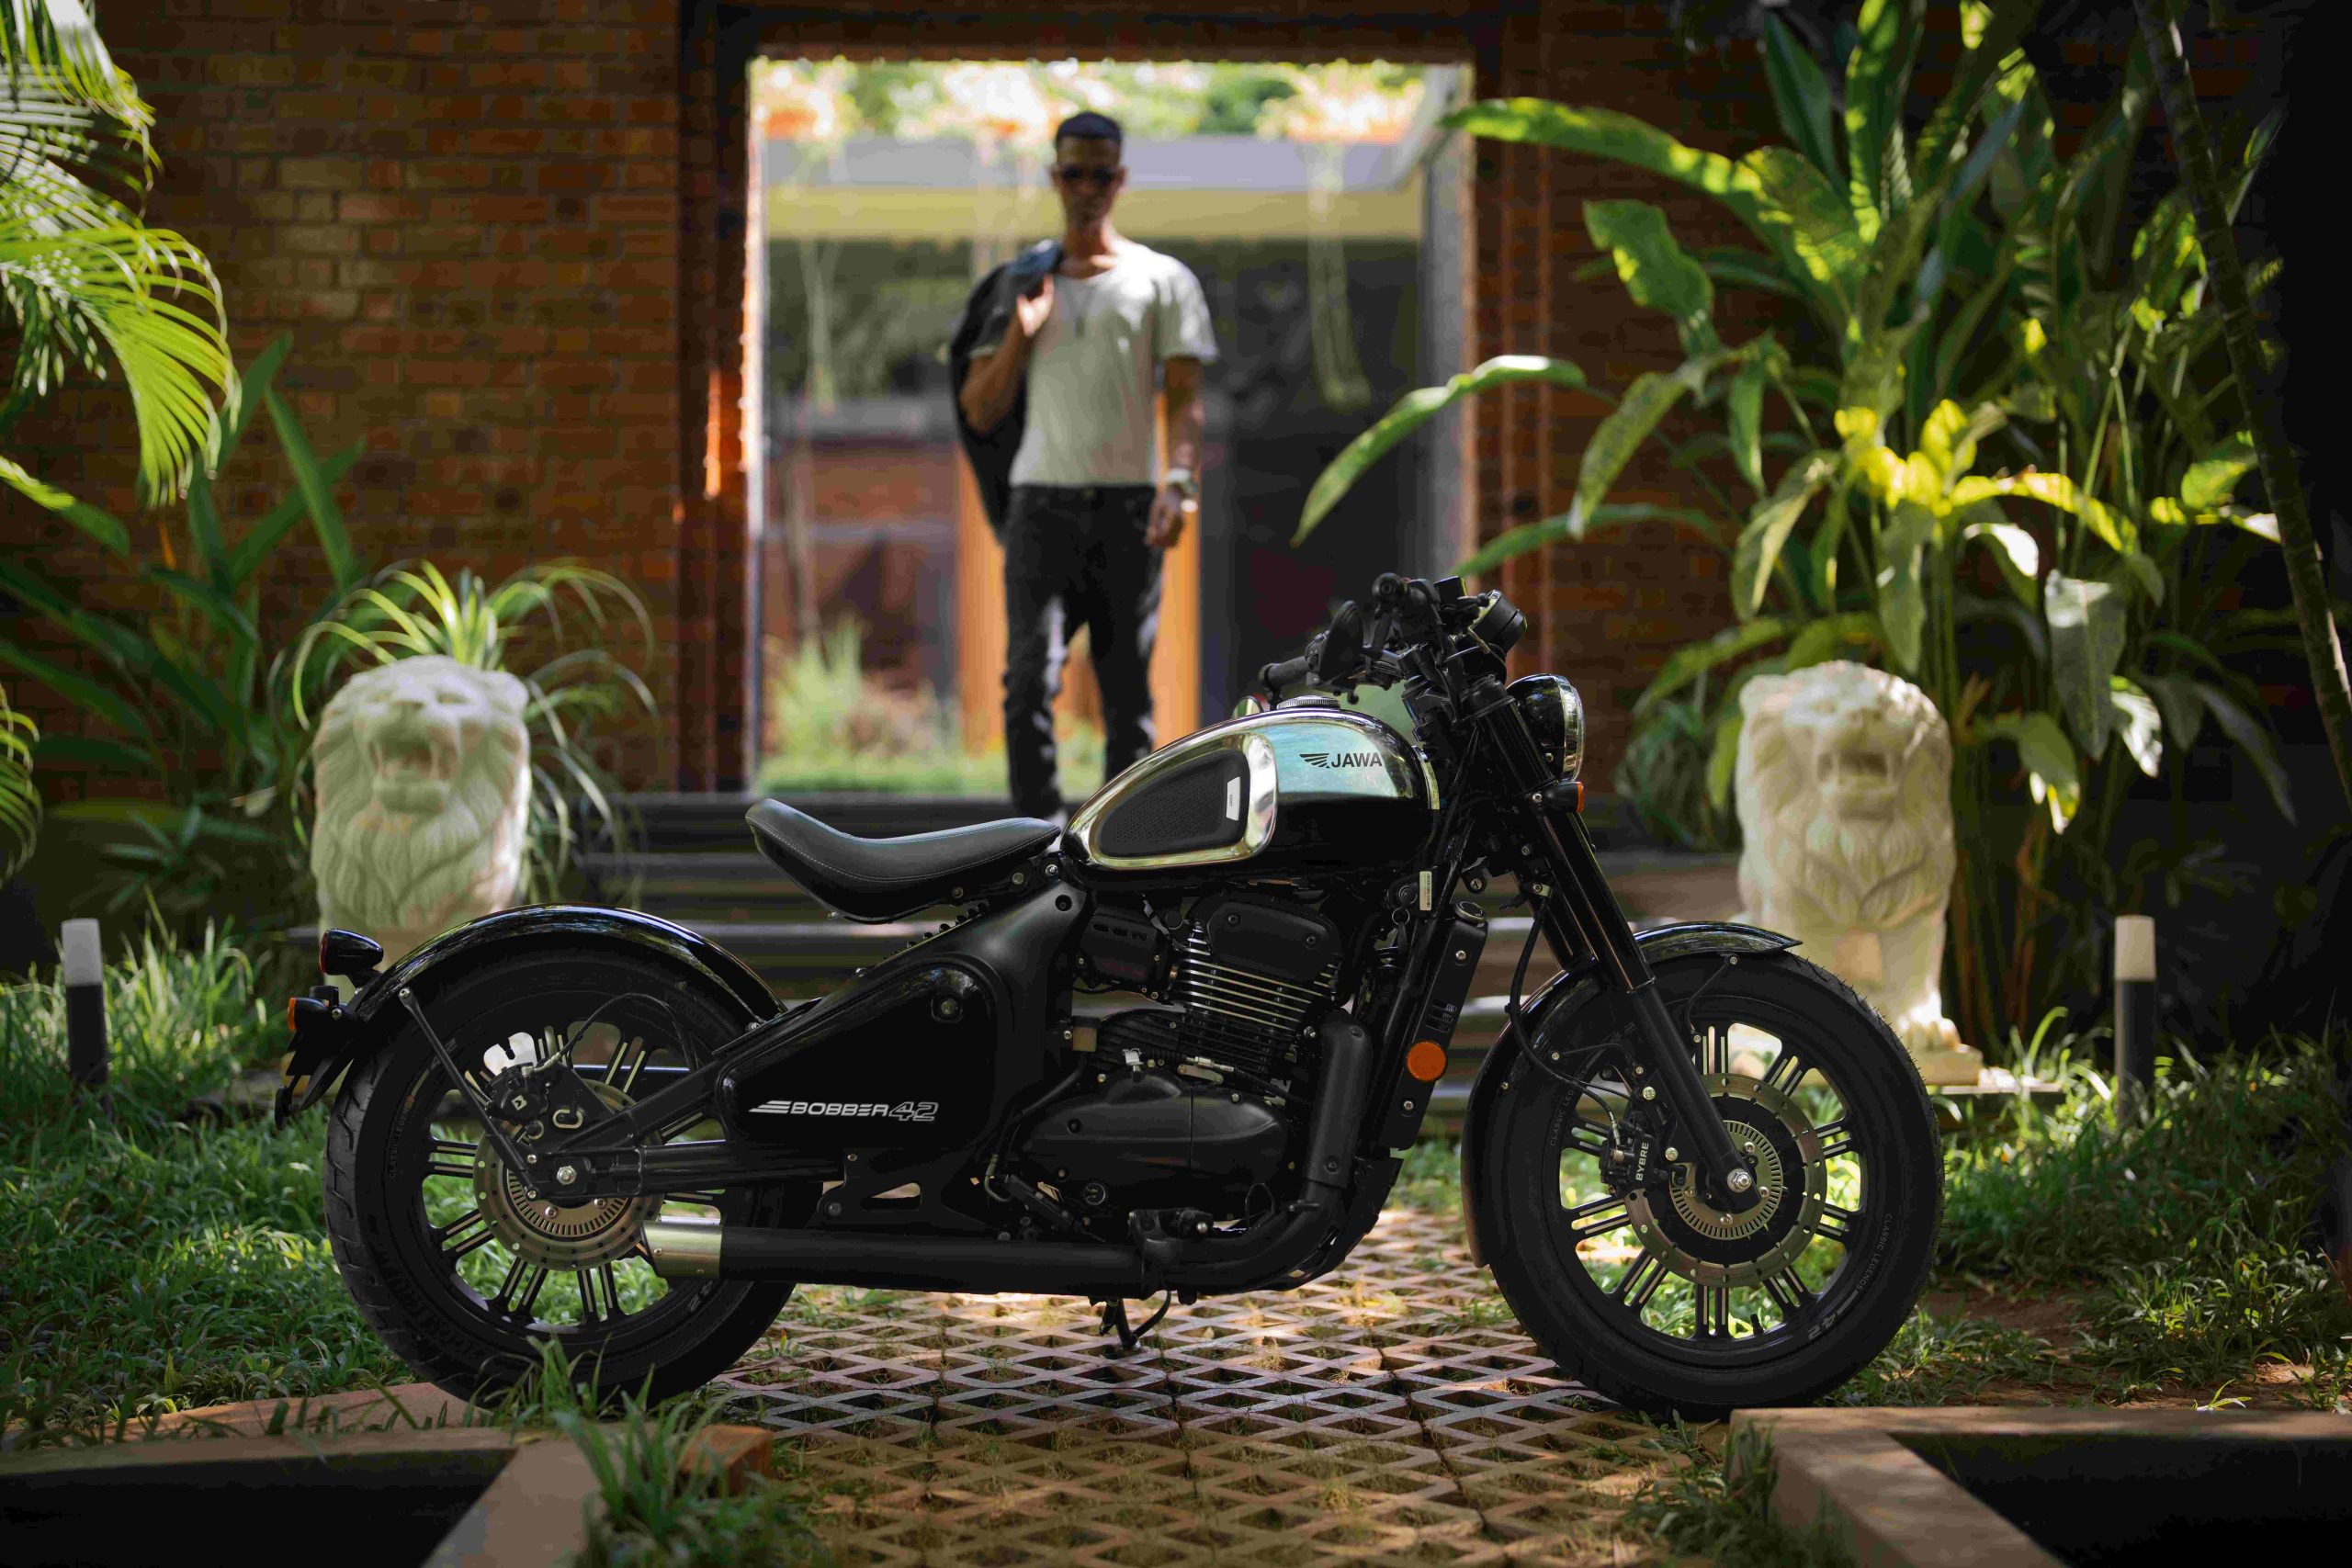 Jawa Yezdi Motorcycles Launches the New Top-of-the-line Jawa 42 Bobber Black Mirror at Rs. 2.25 Lakh